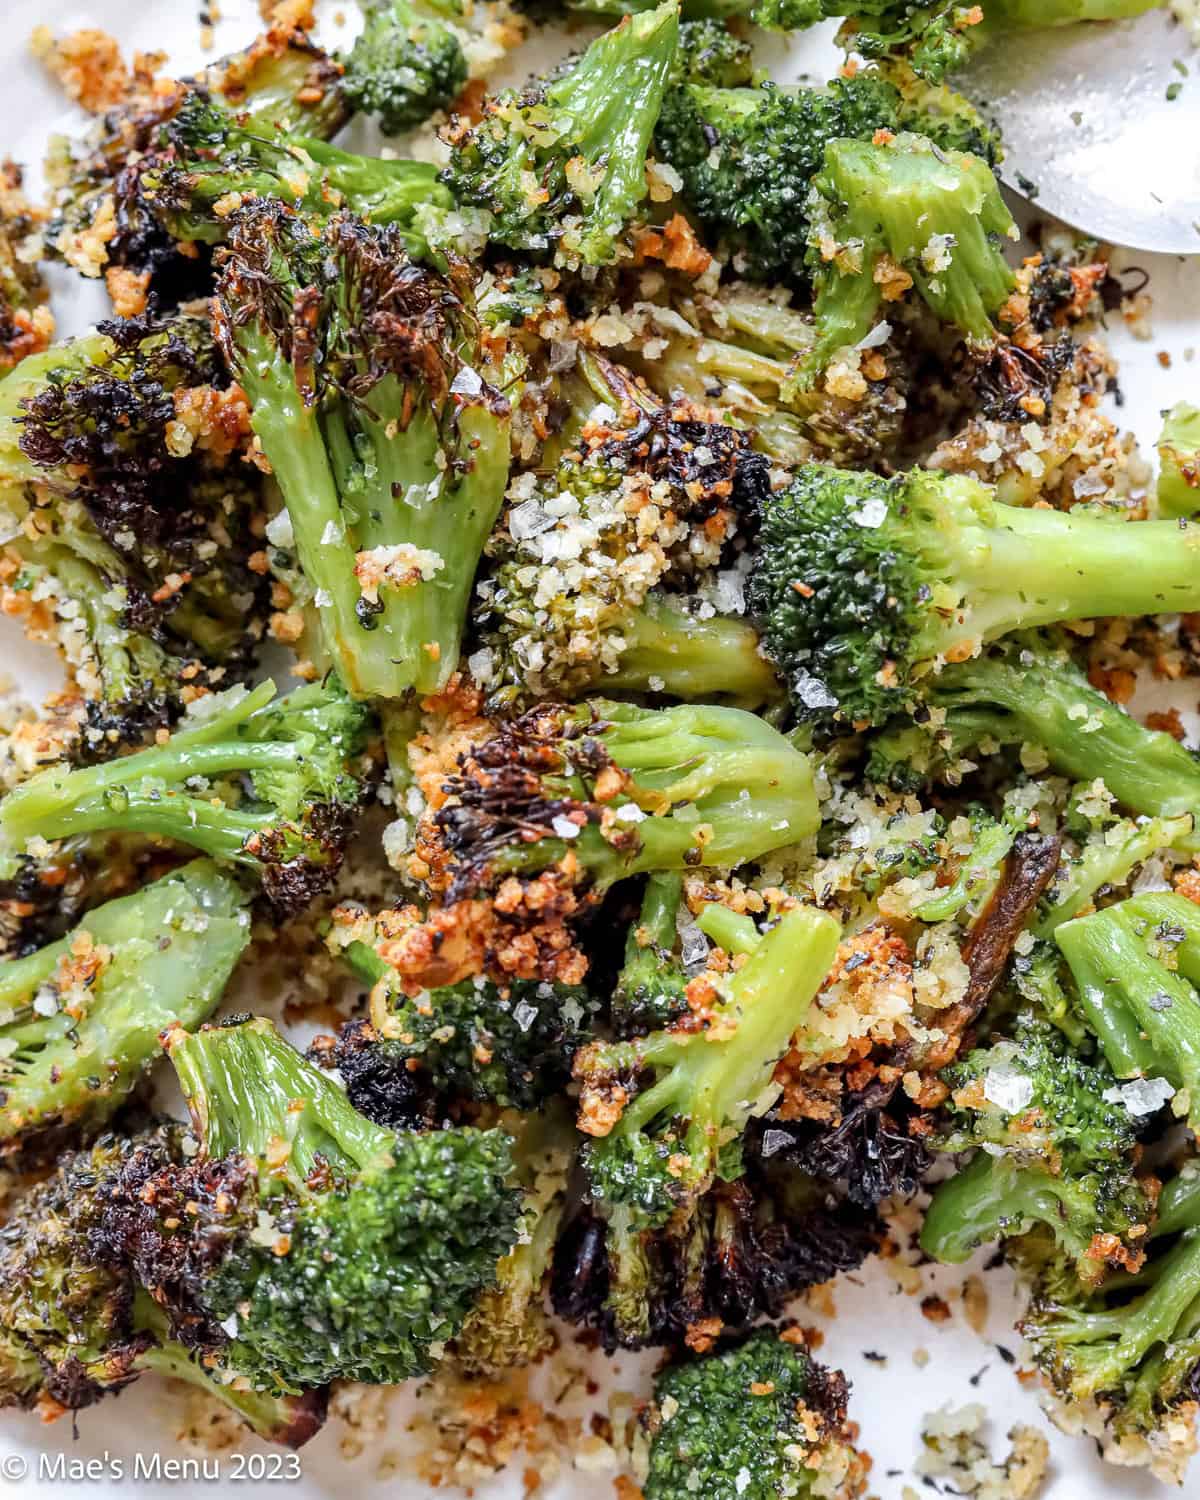 An up-close shot of the air fryer broccoli.